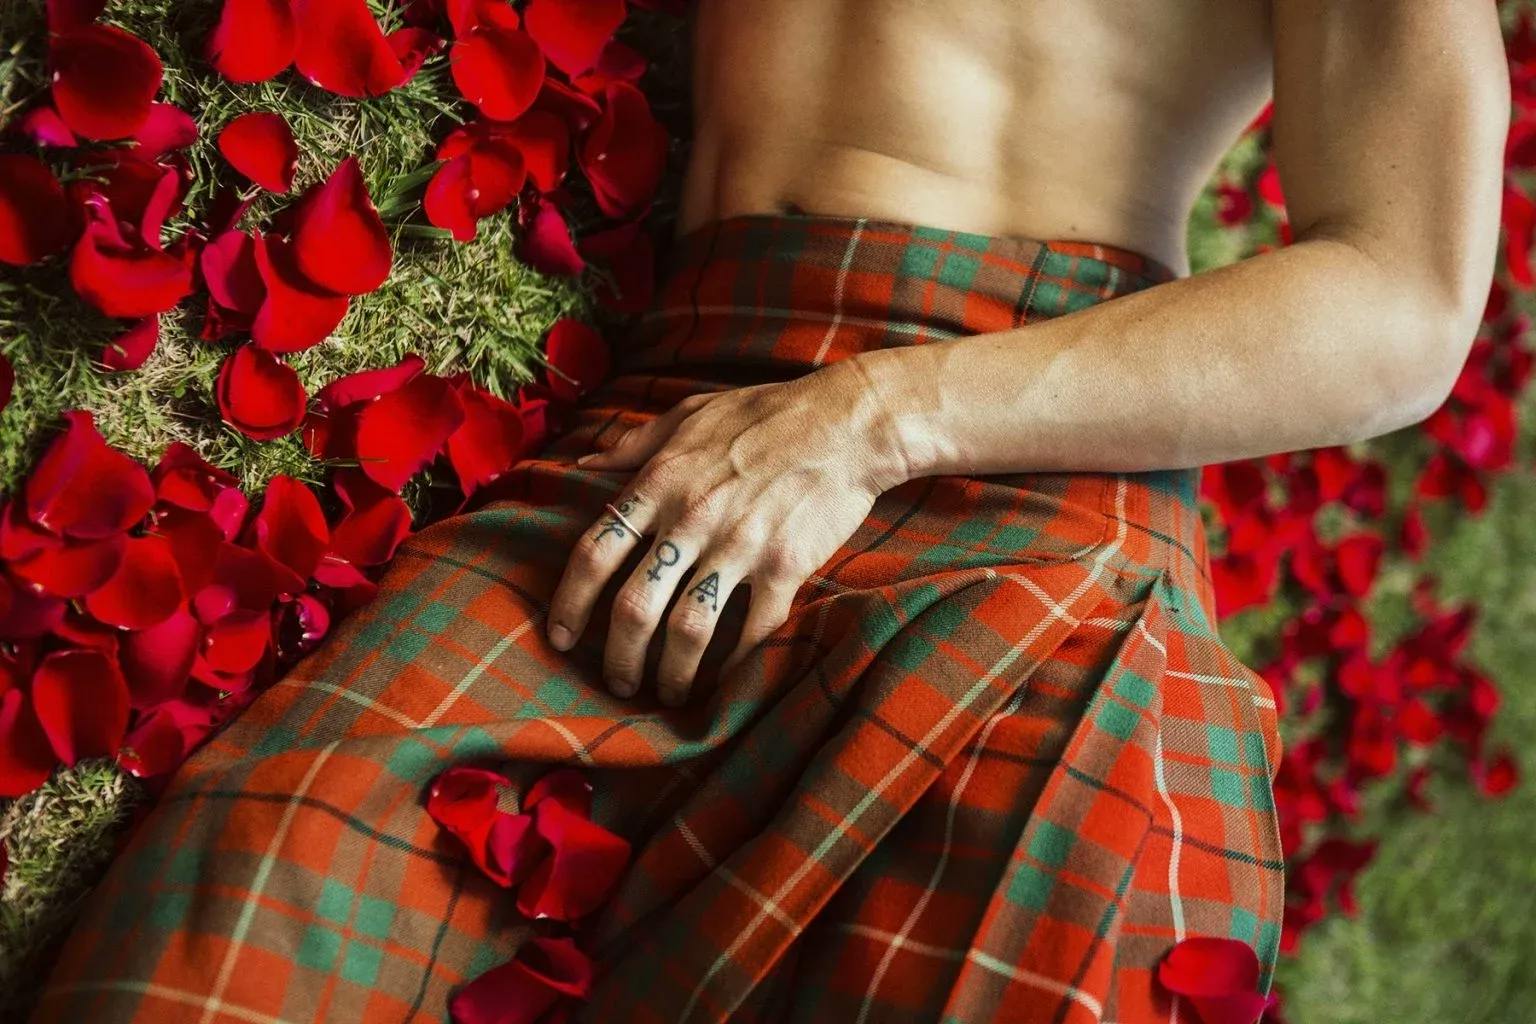 an erotic film still from 'Men in Kilts' on XConfessions by Erika Lust